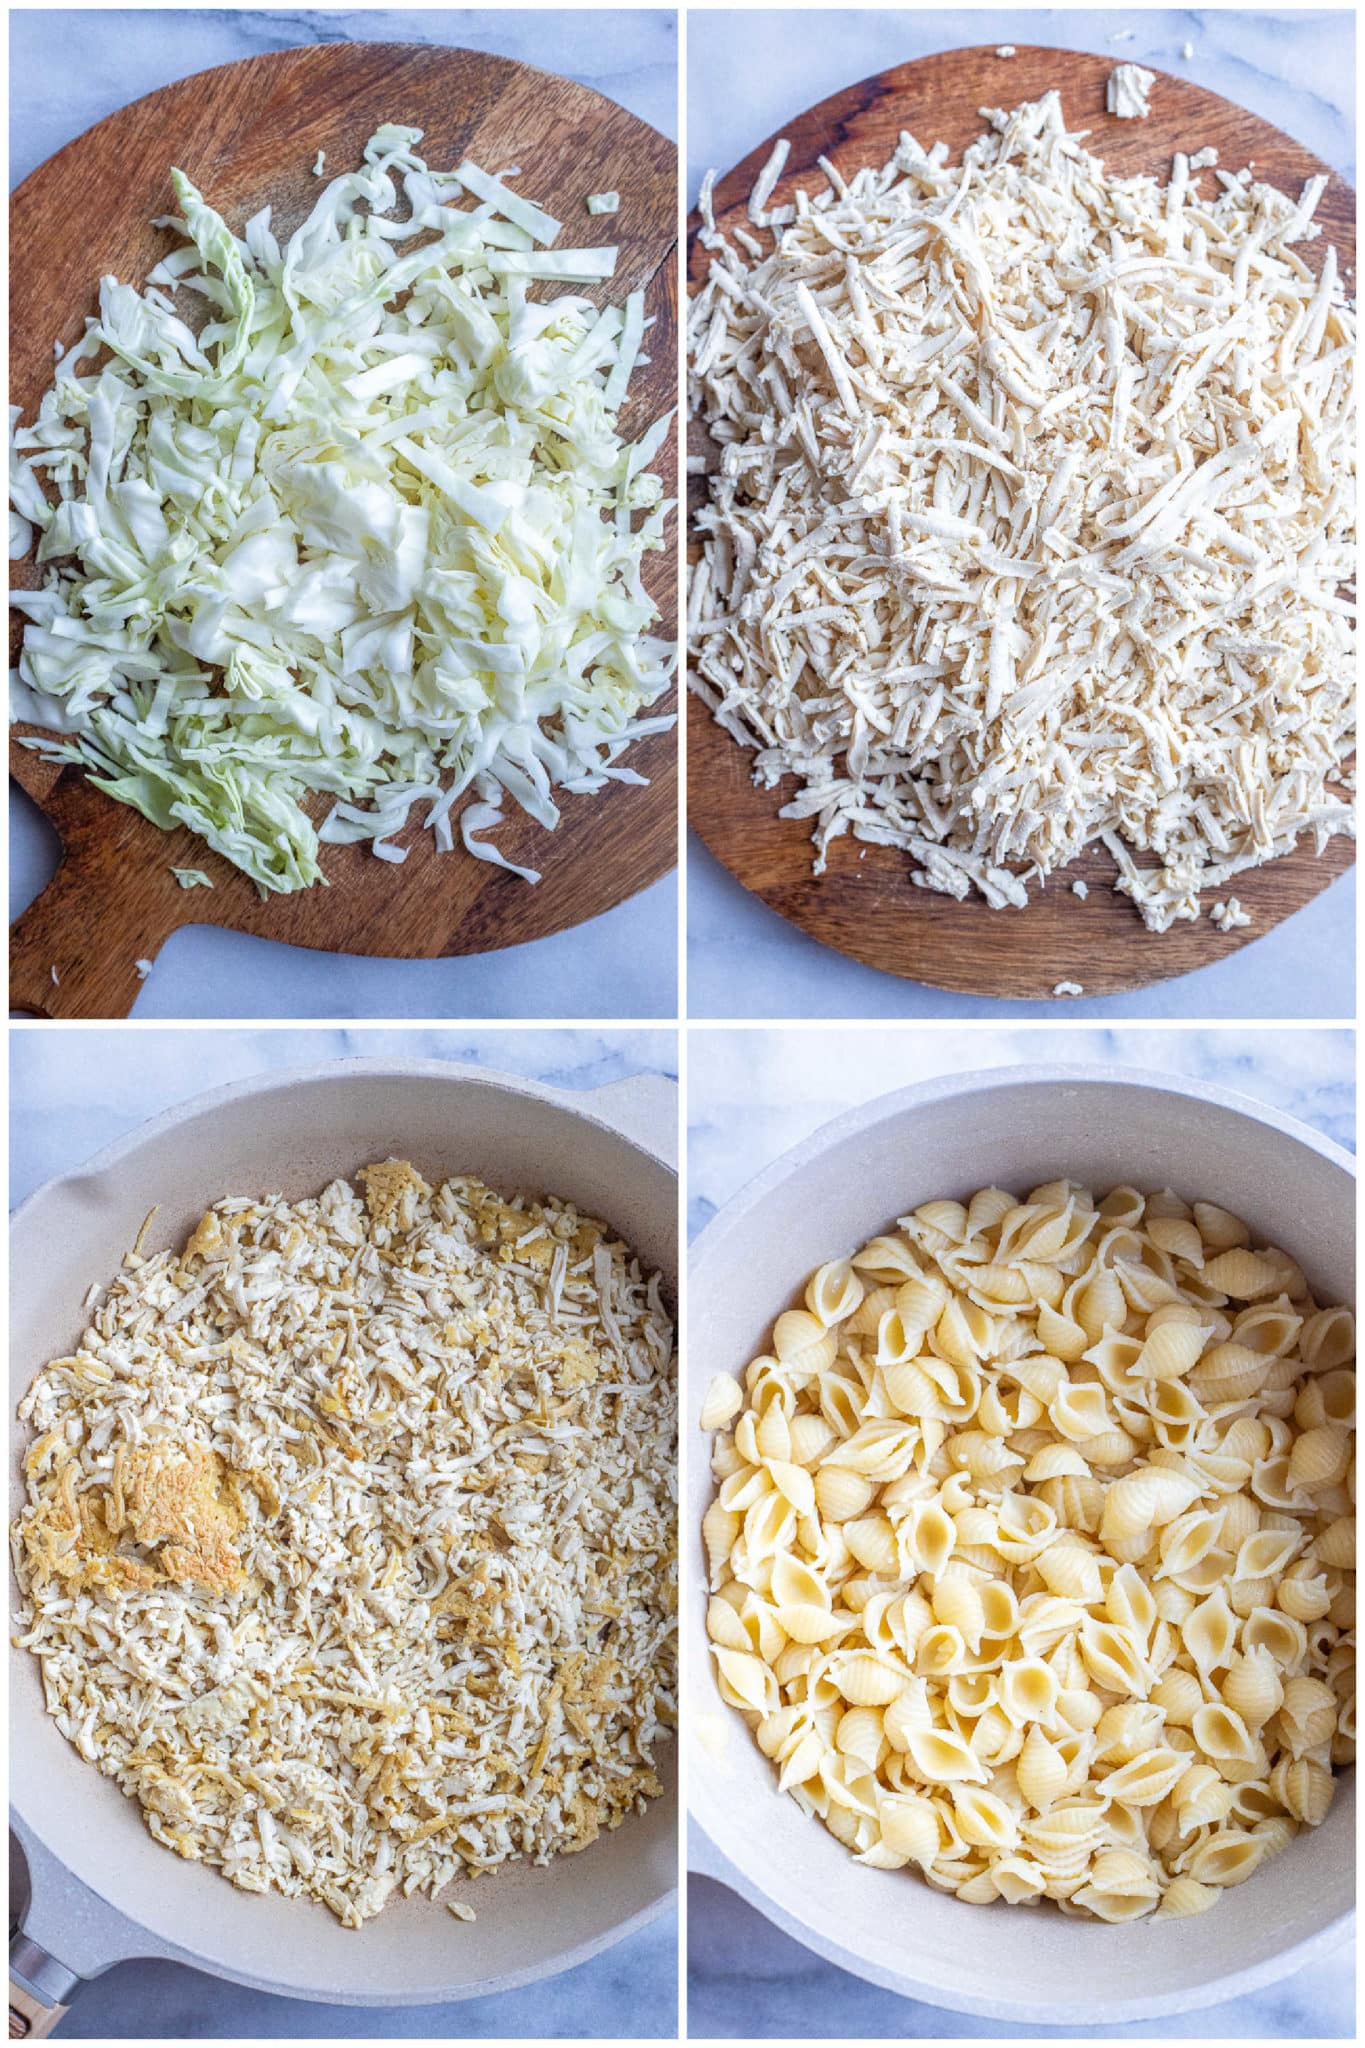 showing how to prepare the cabbage, grated tofu and pasta